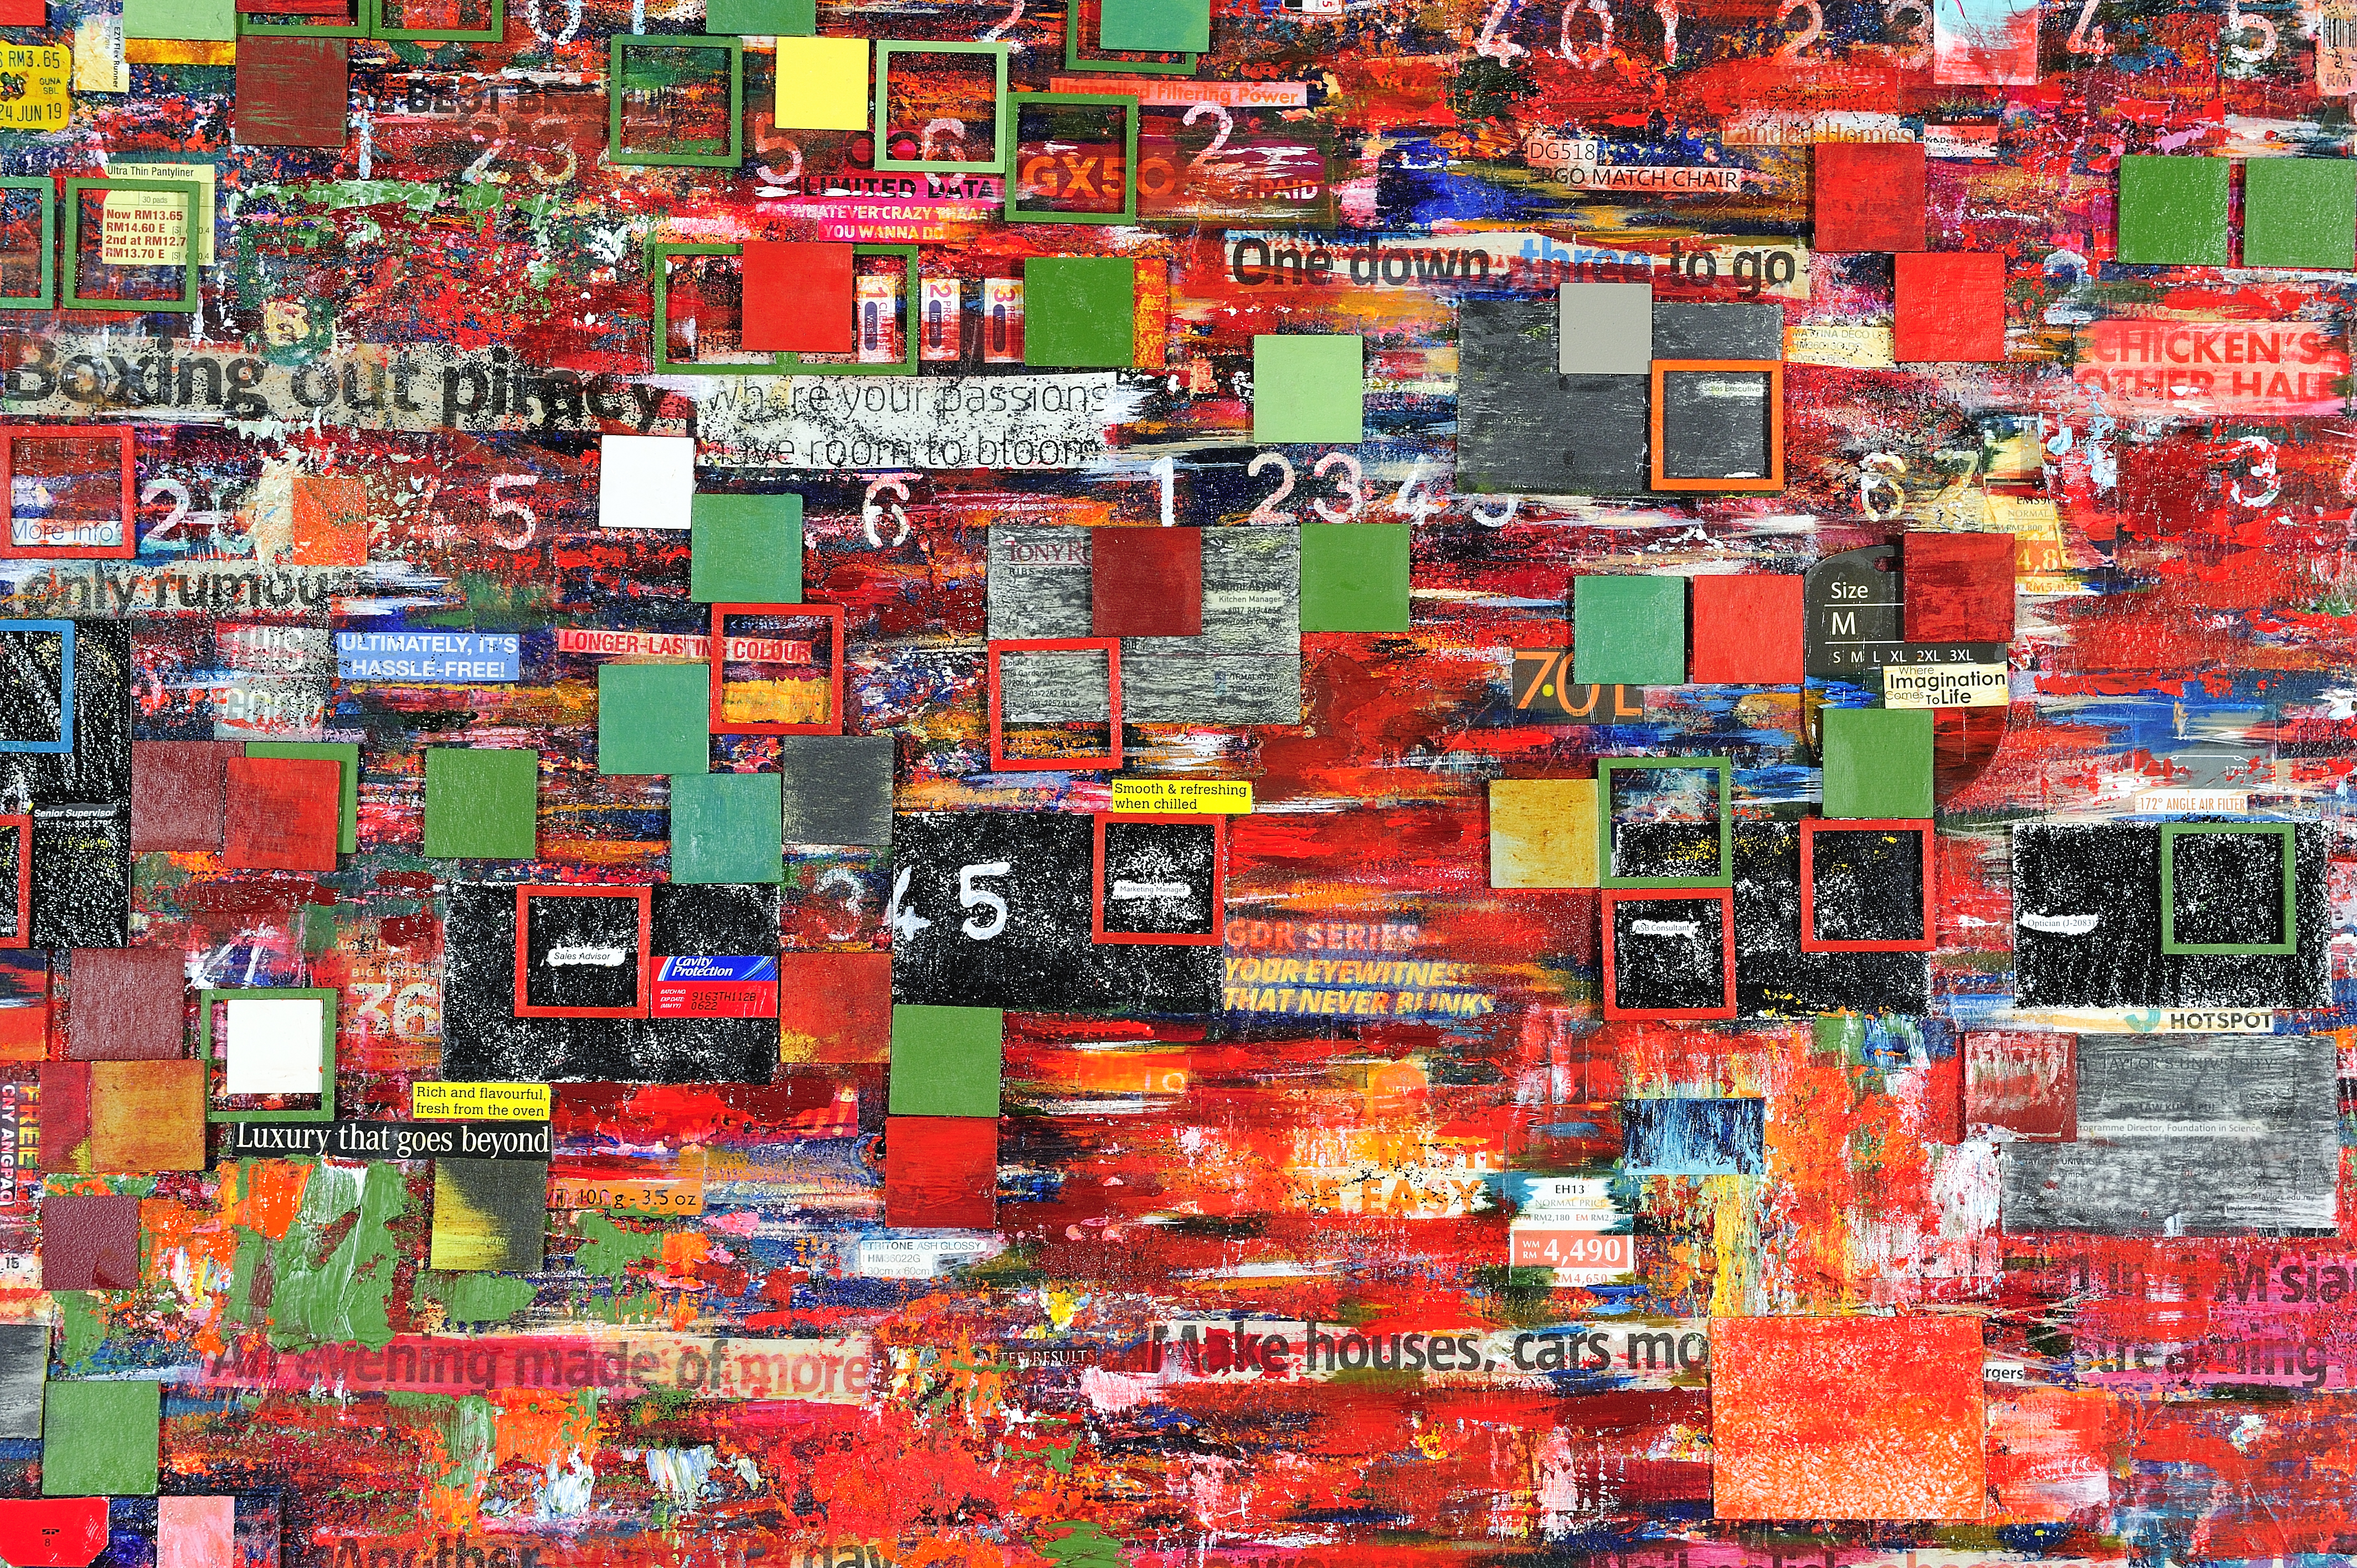 Choy Chun Wei - The Babel Builders Fleeting Persuaders (Close up) (2019) Acrylic, oil, sand and found material on canvas; 92.5cm x 305cm (Diptych) (2)